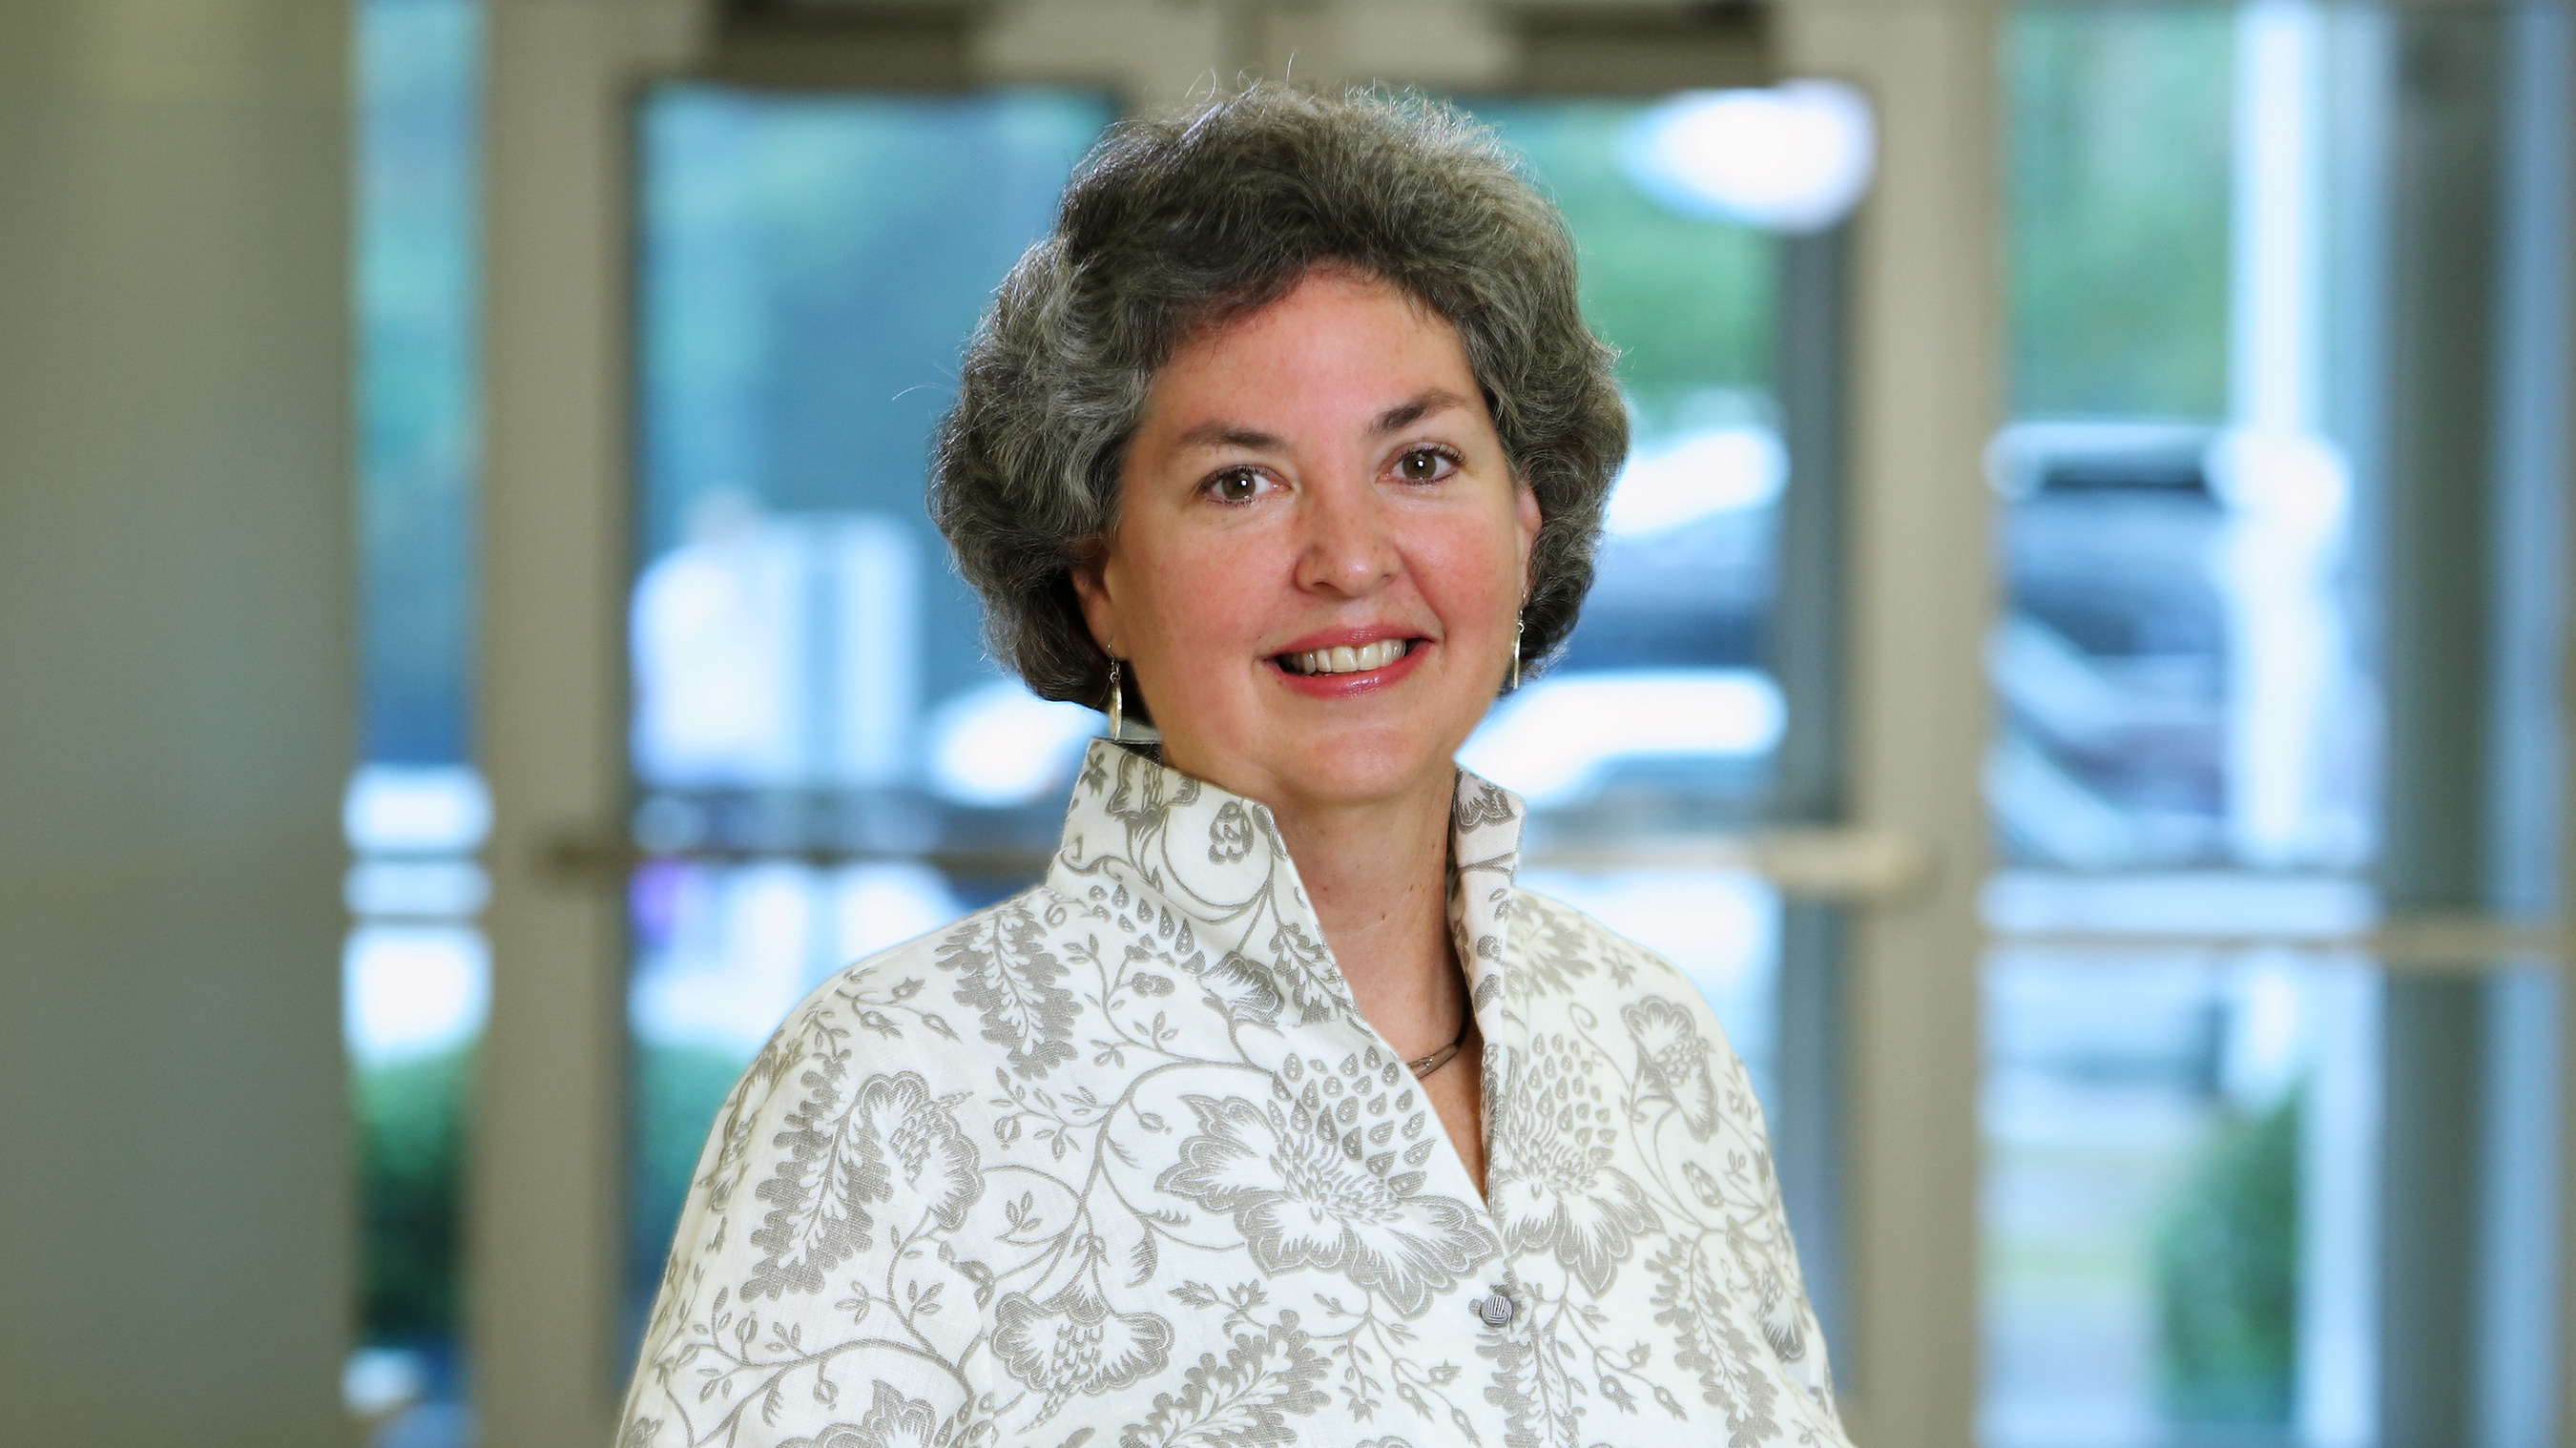 Dr. Elizabeth Hinton Crowther, President of Rappahannock Community College has been elected to Bay Trust Company's Board of Directors. She also serves on Bay Banks of Virginia's Holding Company board.